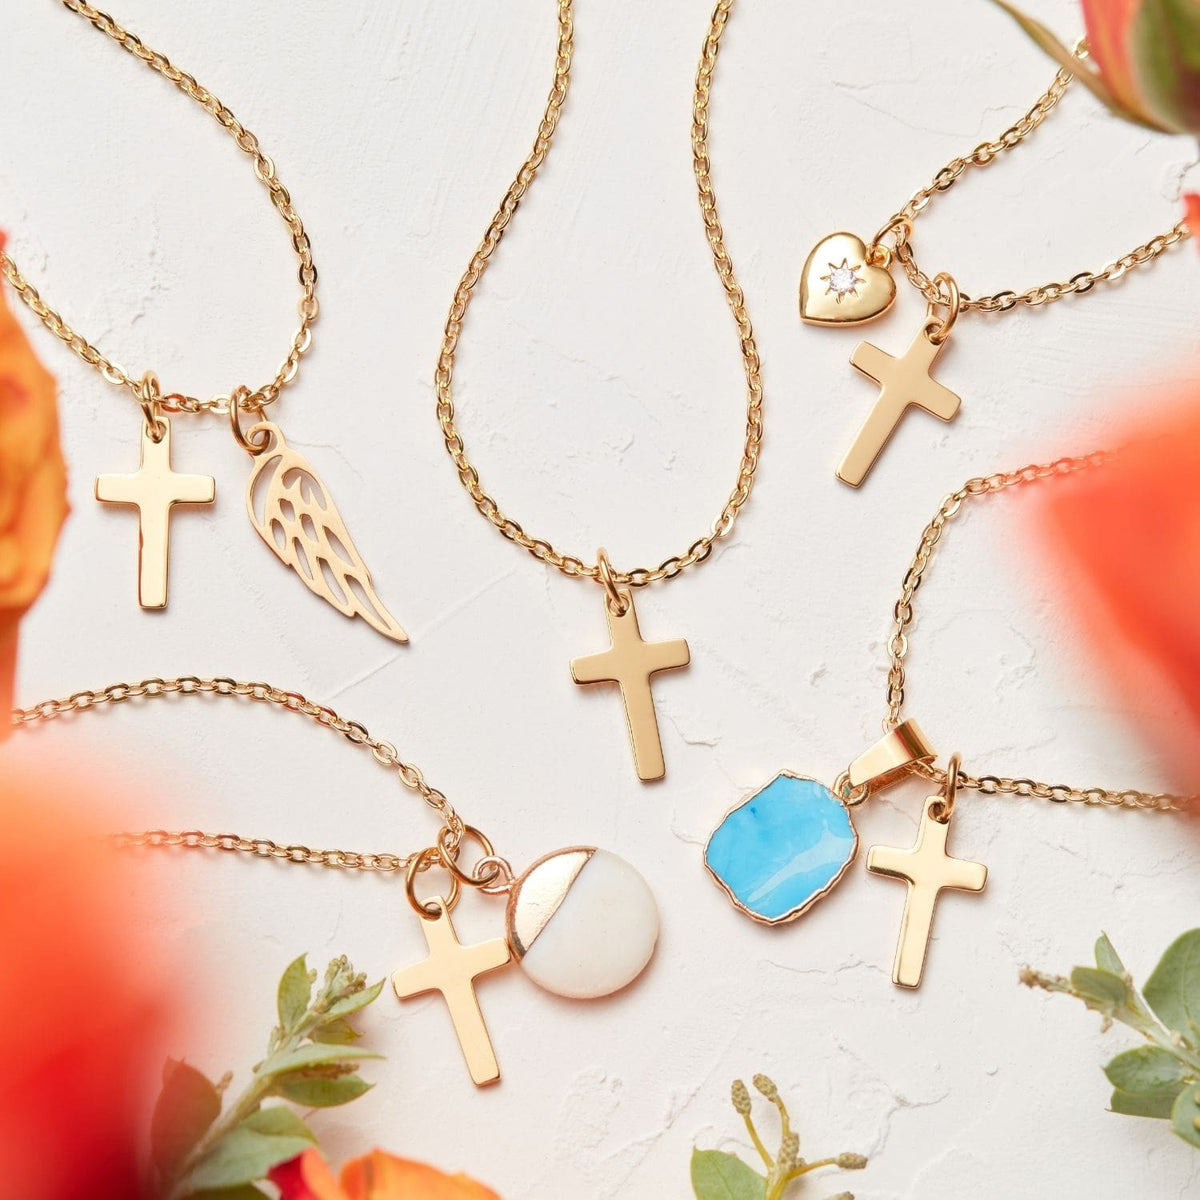 Personalized To My Unbiological Daughter Necklace Family Isn't